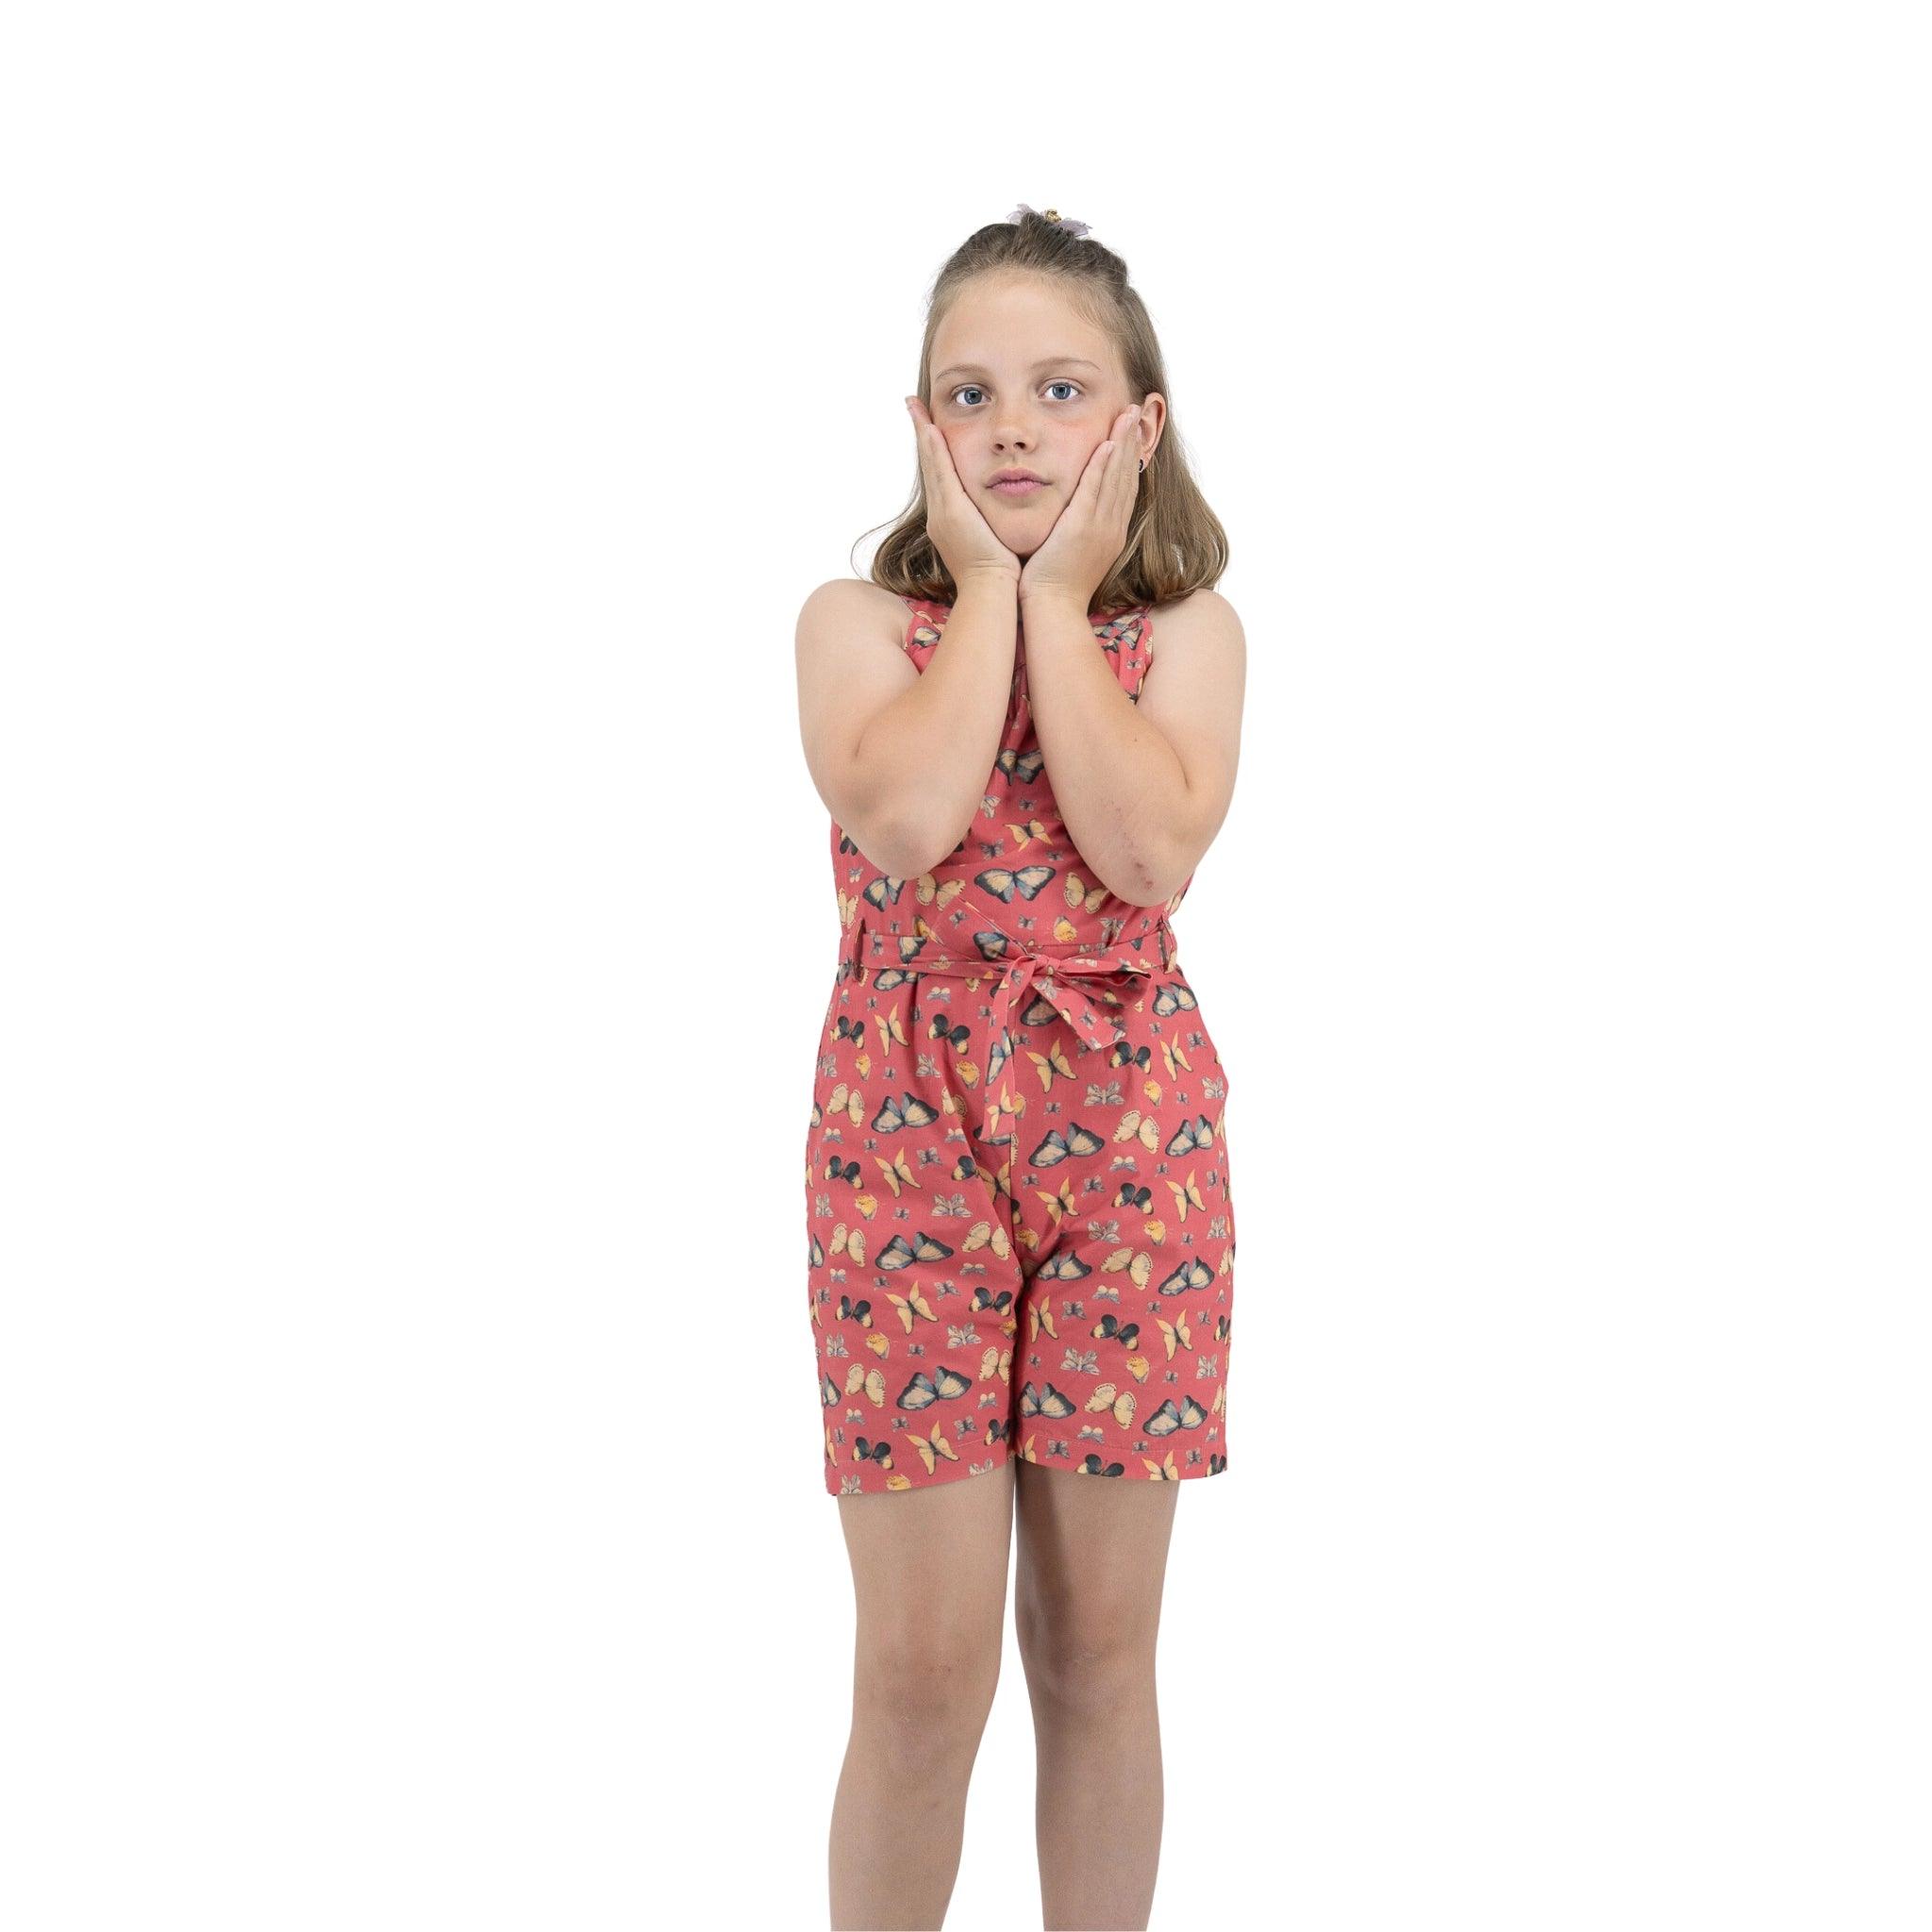 Young girl in a Ruby Trek Cotton Romper by Karee standing with hands on cheeks looking thoughtful, isolated on white background.